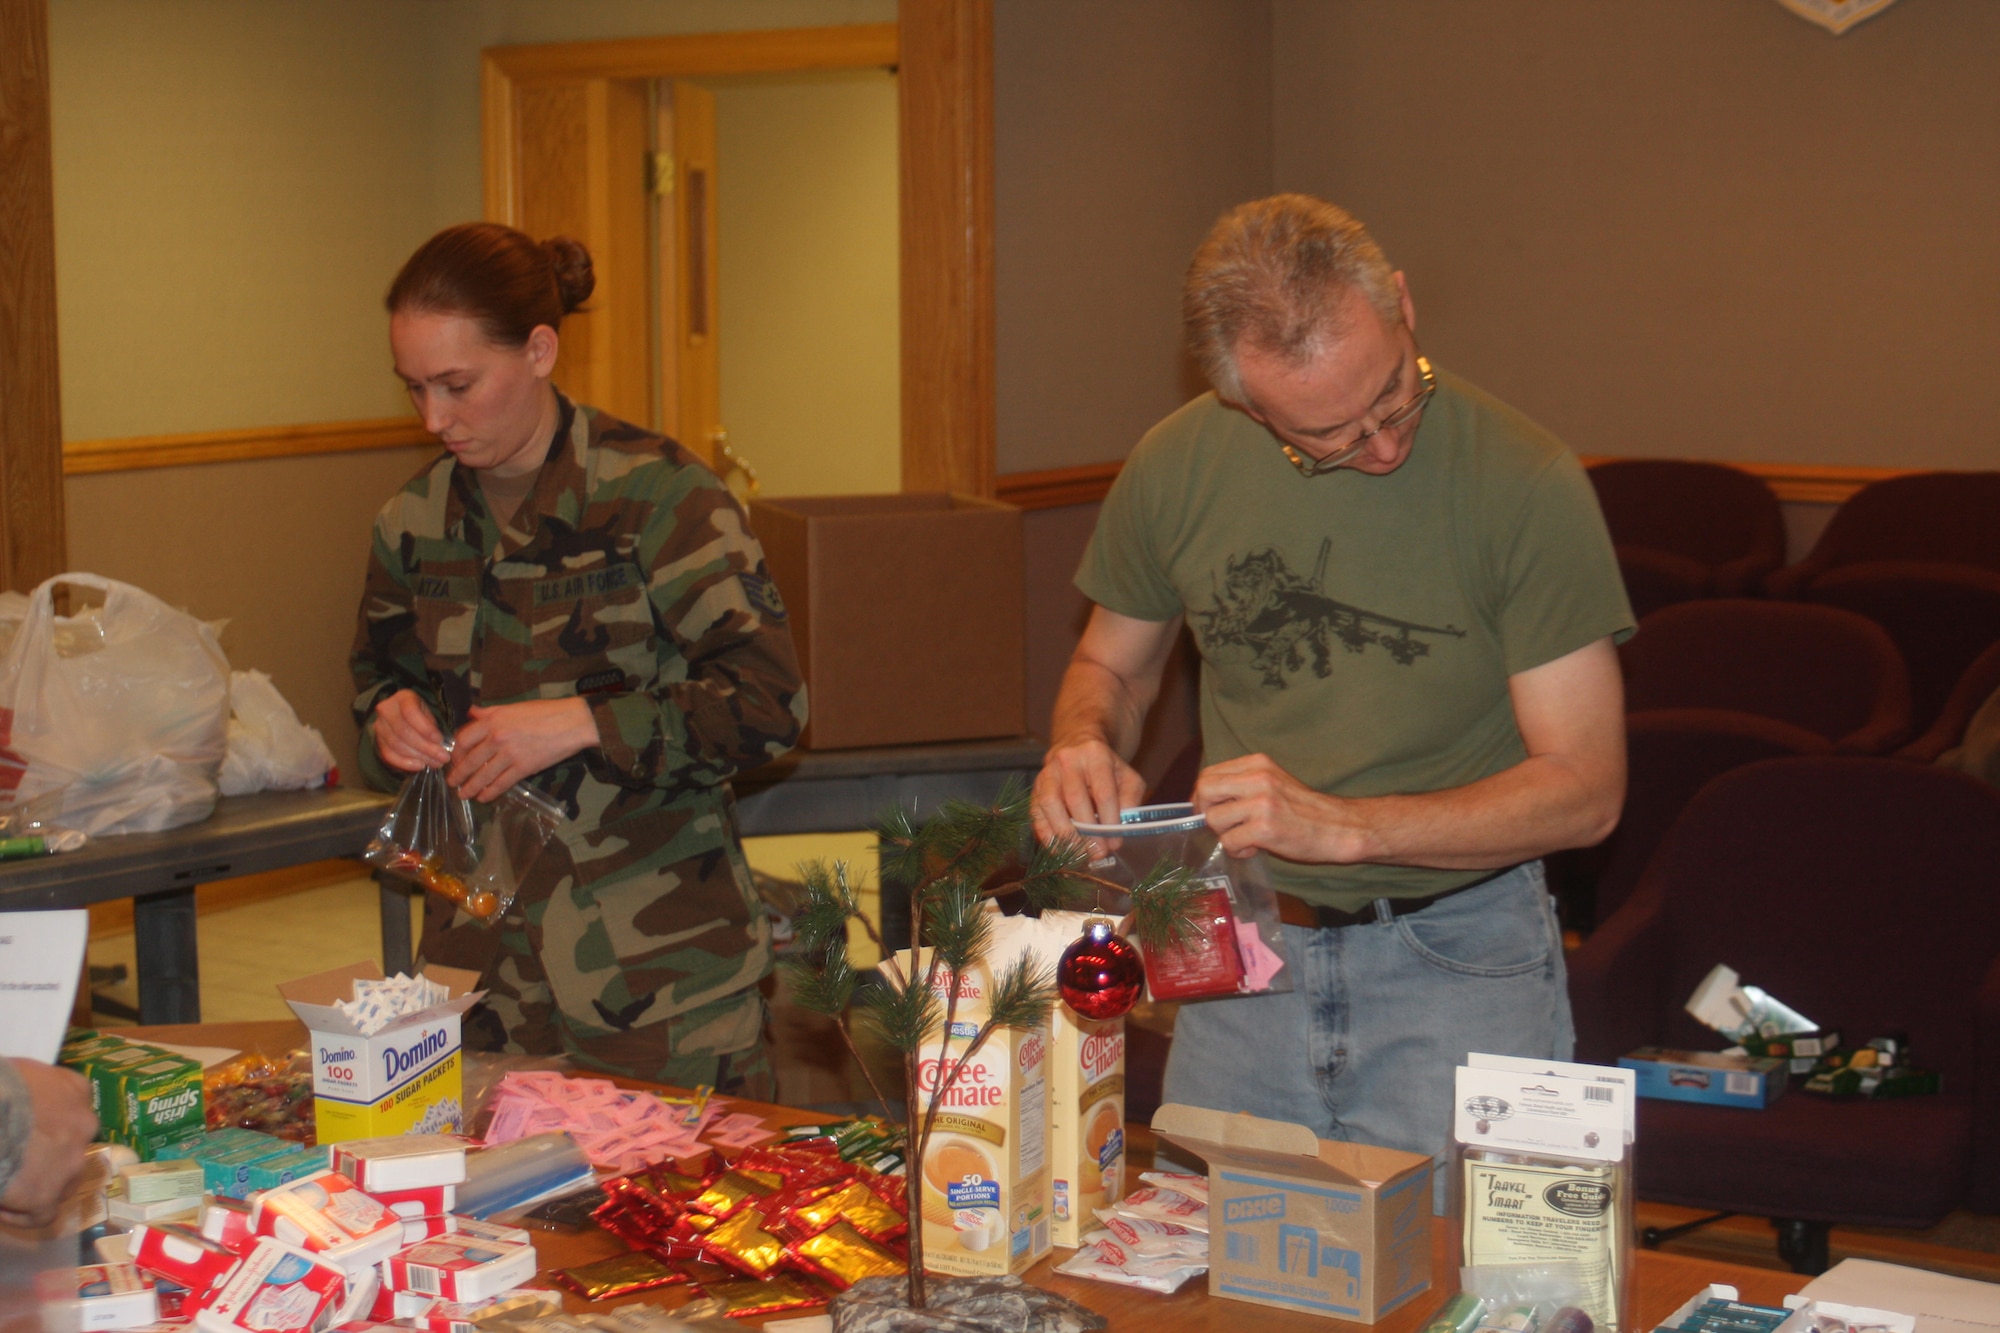 WRIGHT-PATTERSON AIR FORCE BASE, Ohio – Staff Sgt. Chris Gatza, 445th Maintenance Operations Flight, and Master Sgt. John Guillaum, 445th Maintenance Group, quality assurance, fill bags with items that will be given to residents of the Veterans Affairs Medical Center, Dayton, Ohio, Dec. 5.  Volunteers from the 445th Maintenance Group spent the afternoon filling more than 100 bags with items, such as soap, shampoo, lip balm and combs. Bags were built for both men and women so gender specific items could be included.  (U. S. Air Force photo/Stacy Vaughn)